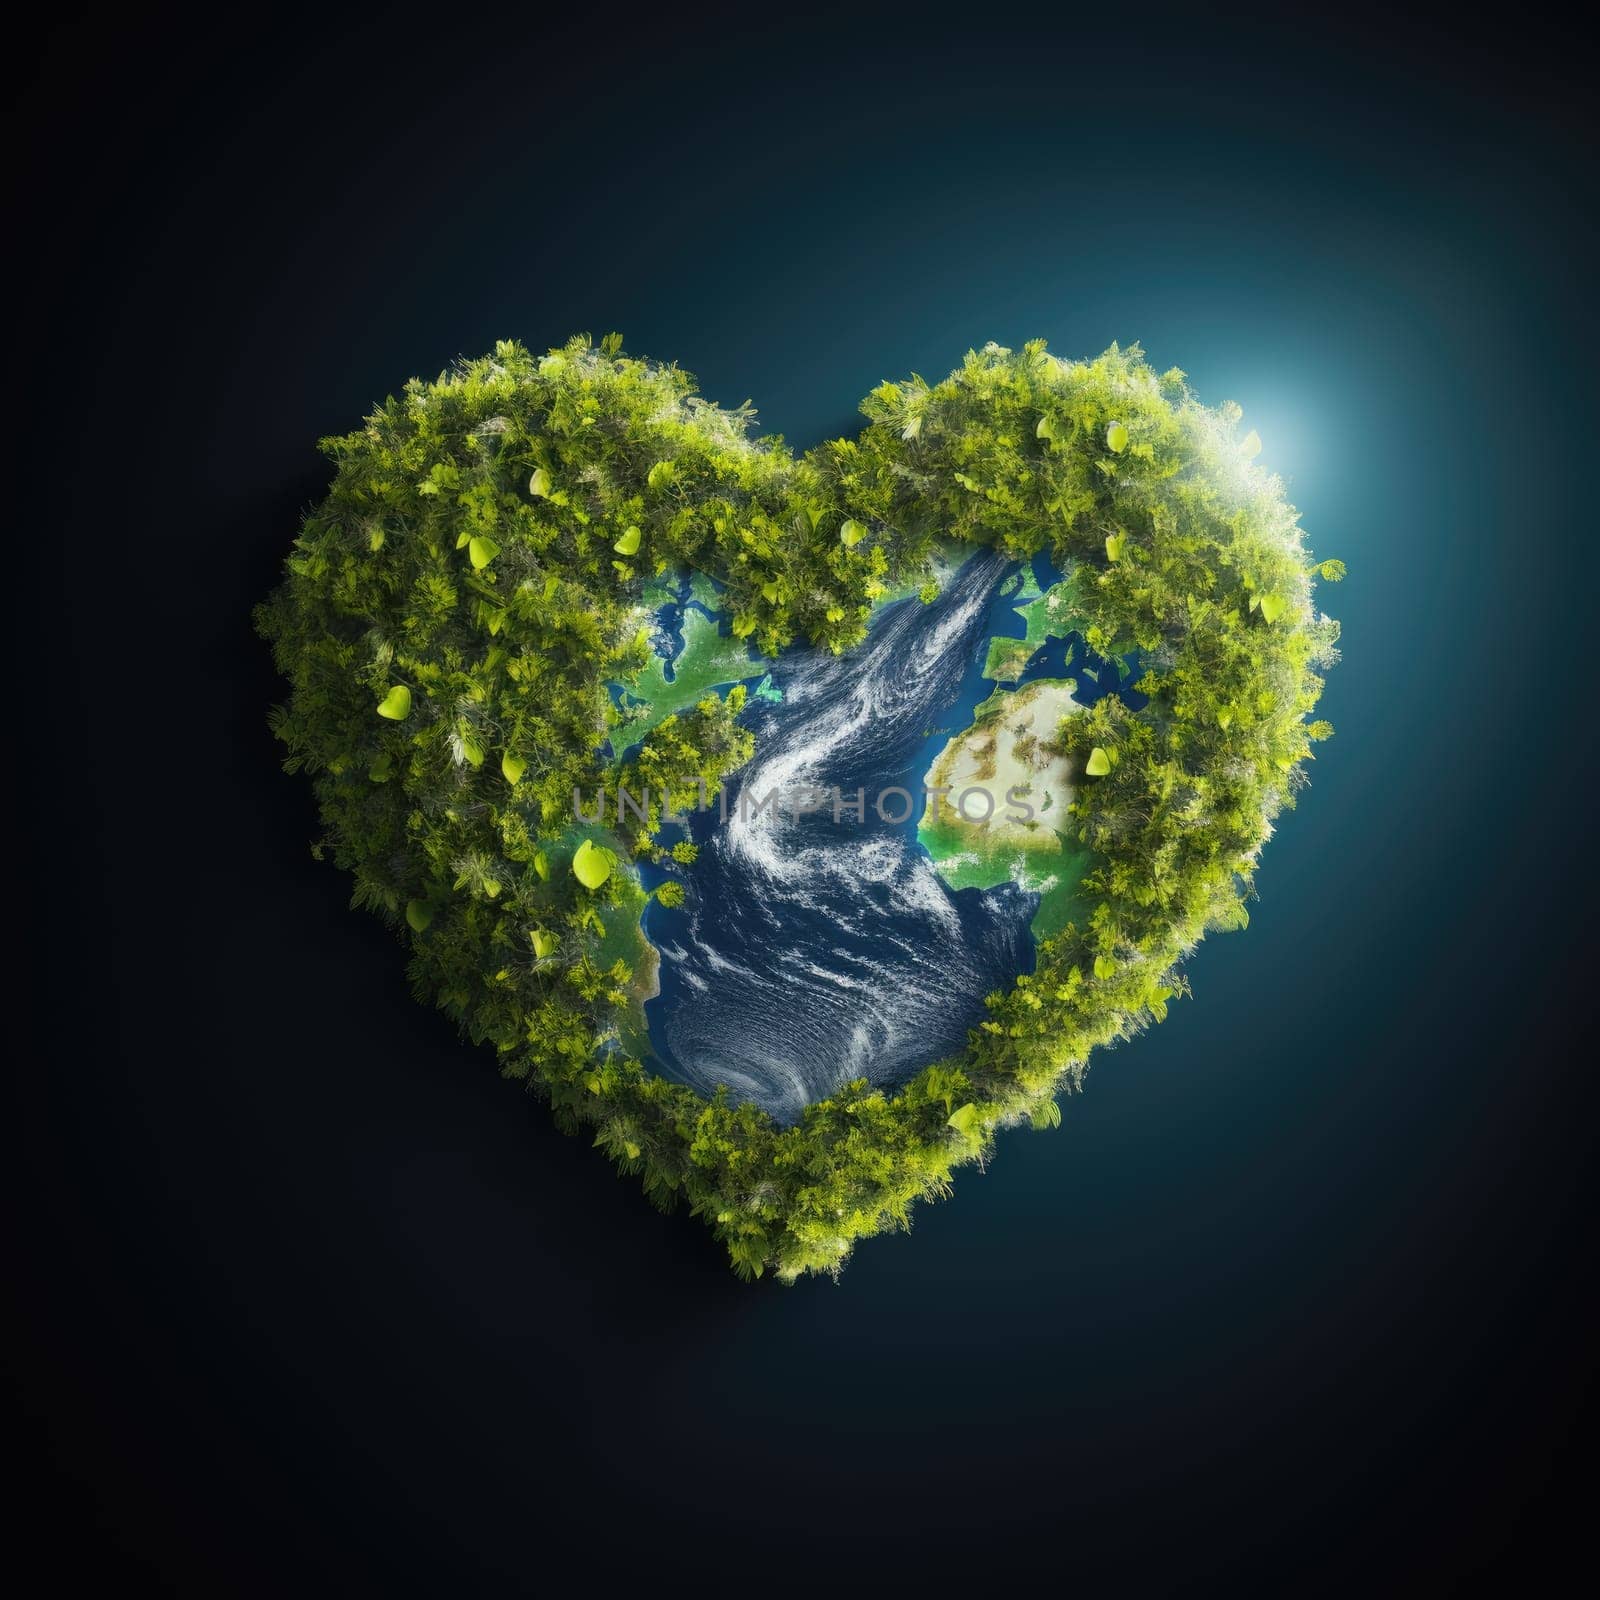 Earth in the shape of a heart, ecology and environment concept. AI Generated